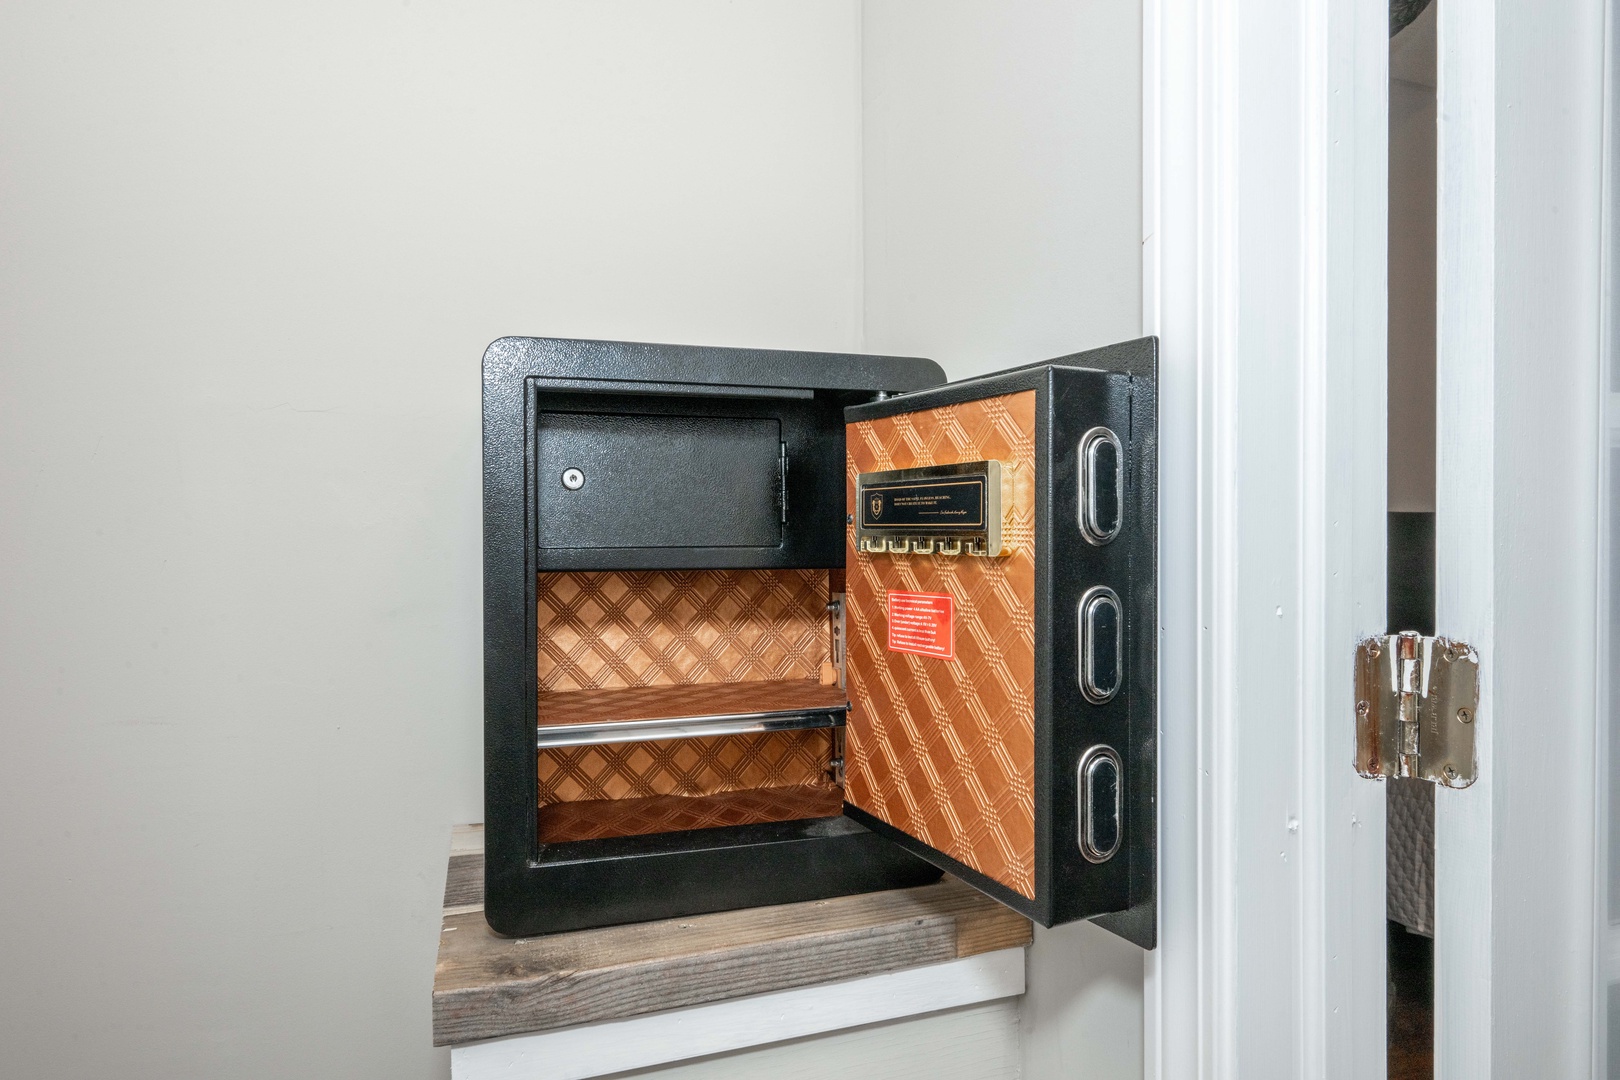 Keep valuables locked away in the master suite’s safe